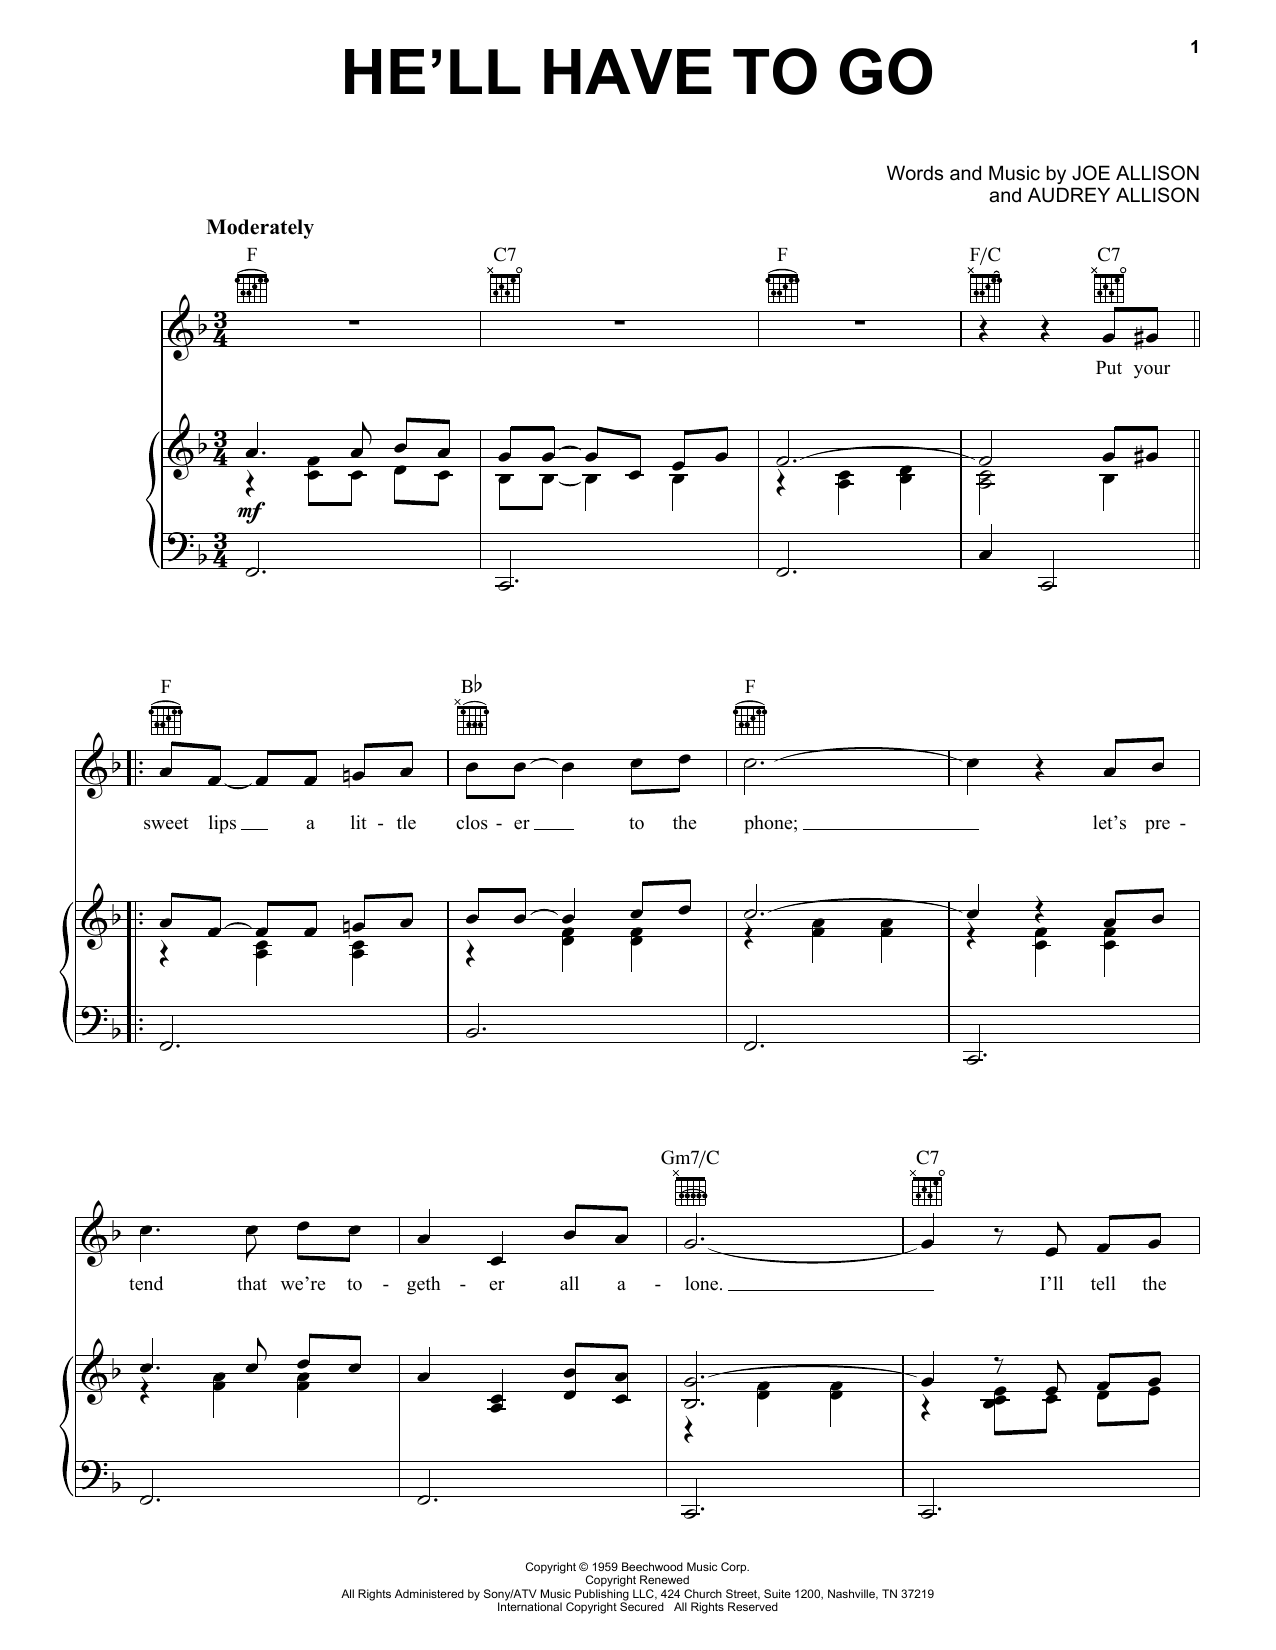 Jim Reeves He'll Have To Go sheet music notes and chords. Download Printable PDF.